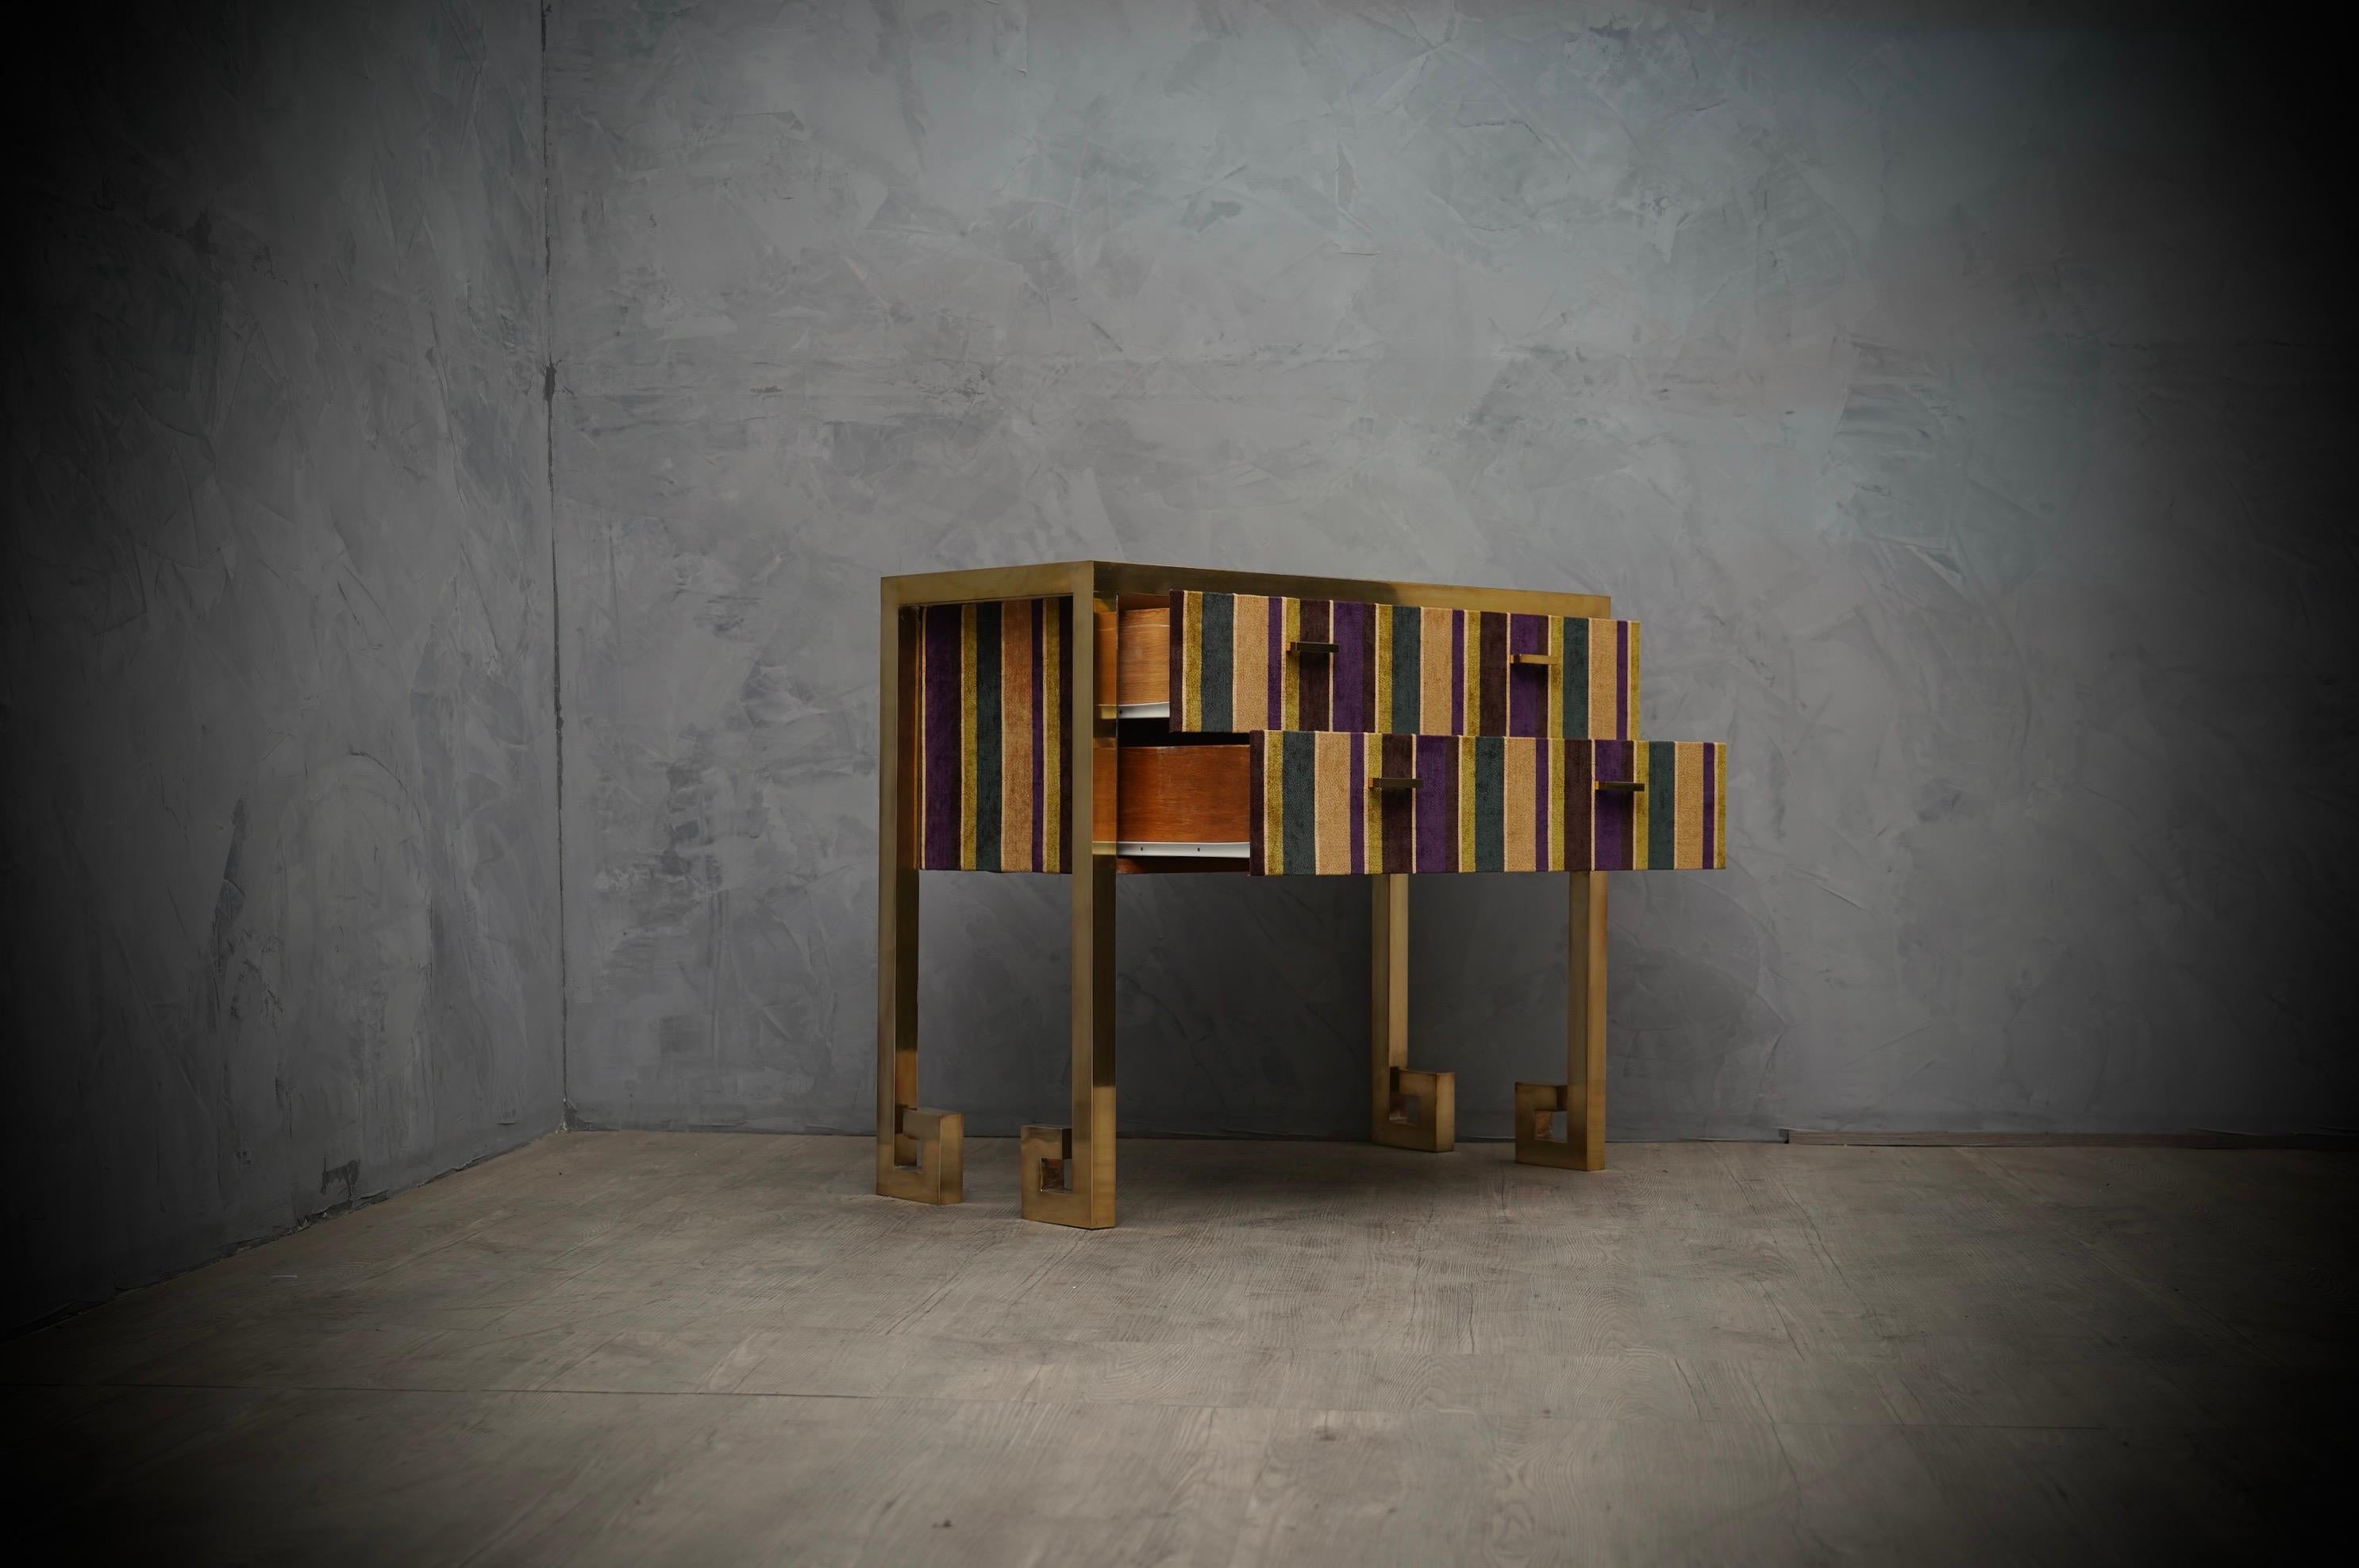 Glamor and bright colors dresser, due to the choice of refined materials.

The whole external structure is in polished brass, while the inside of the body is in wood covered in striped velvet, in shades of green and brown. The brass structure form a